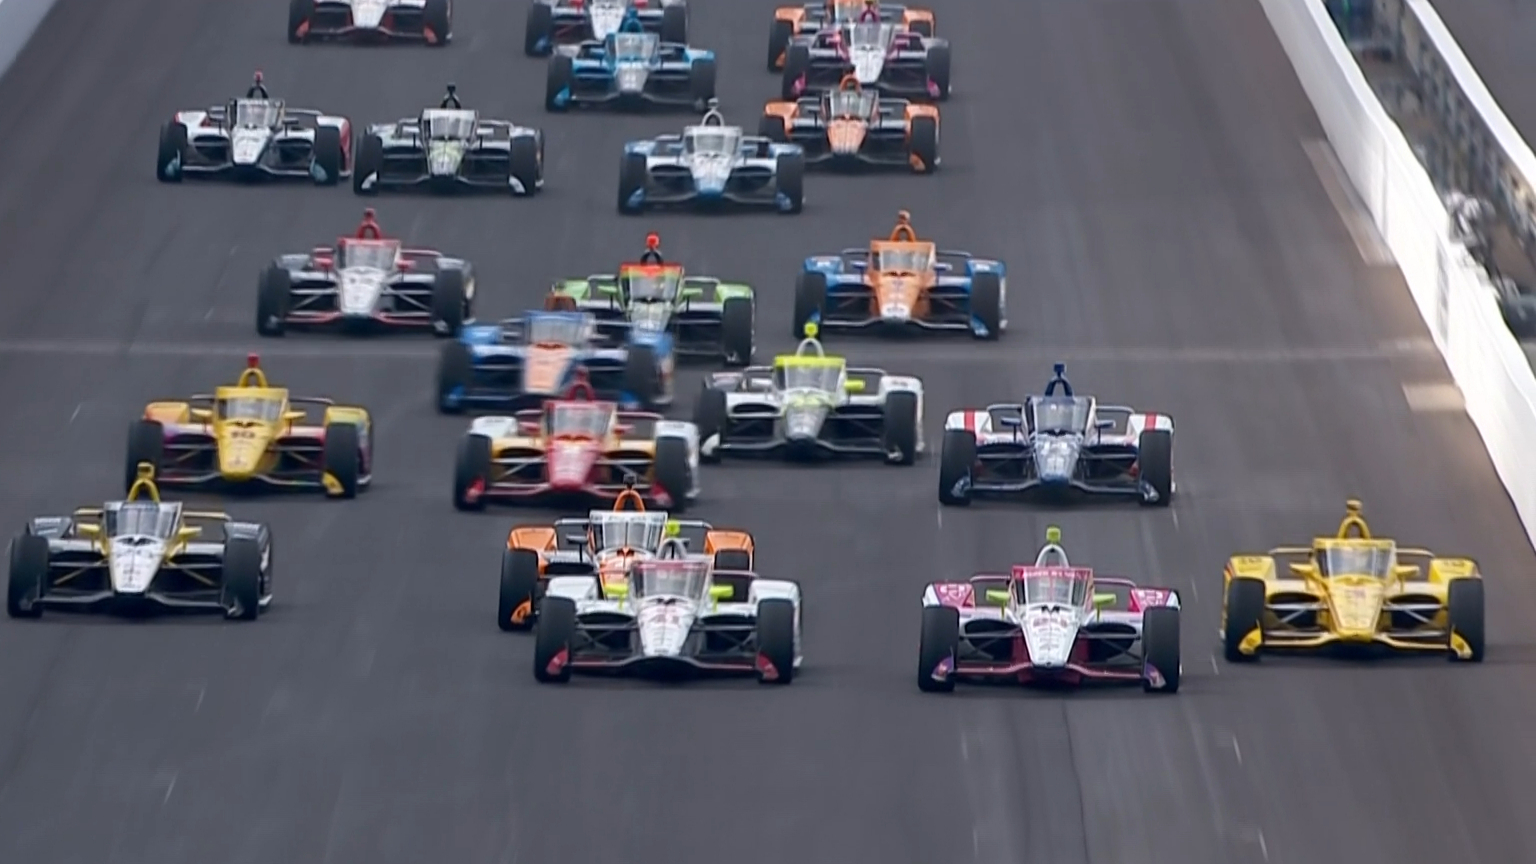 Scott McLaughlin's three-wide pass for Indy 500 lead